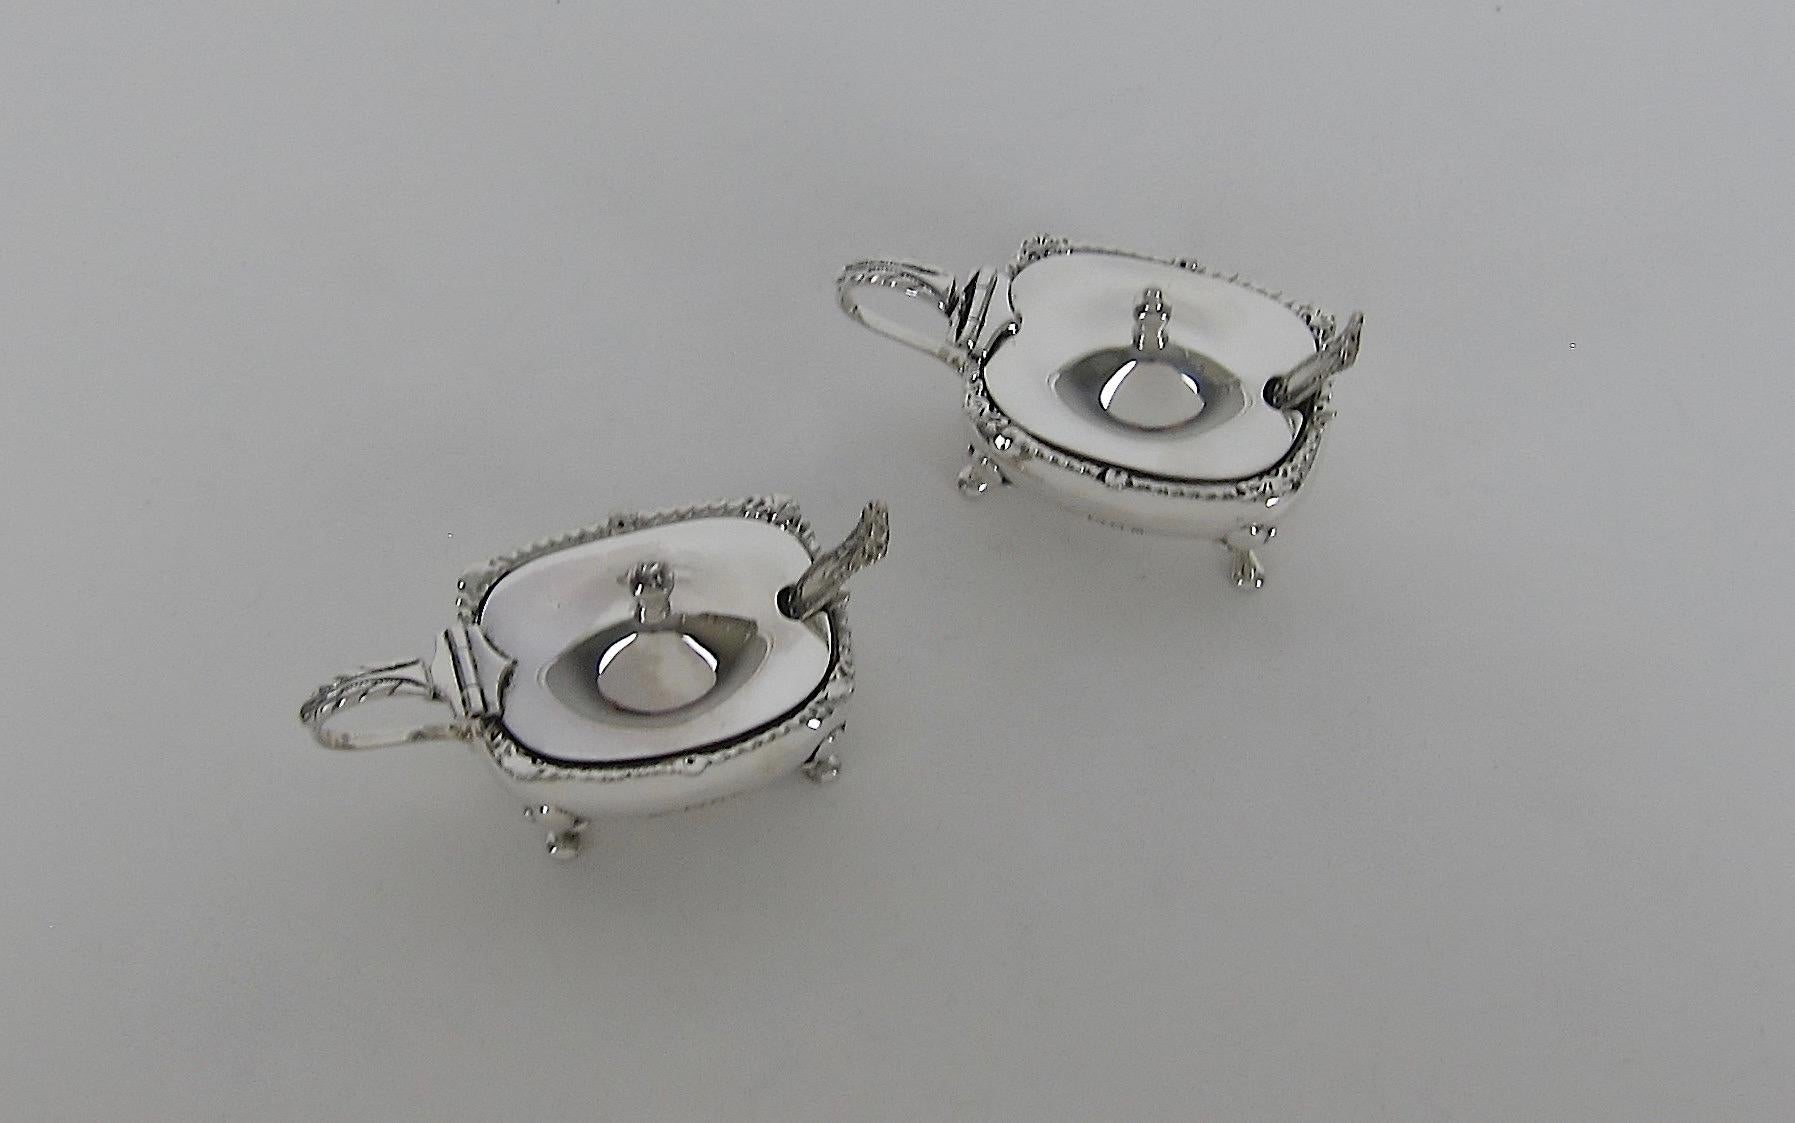 Antique Sterling Silver Mustard Pots from the Goldsmiths & Silversmiths Co Ltd 2